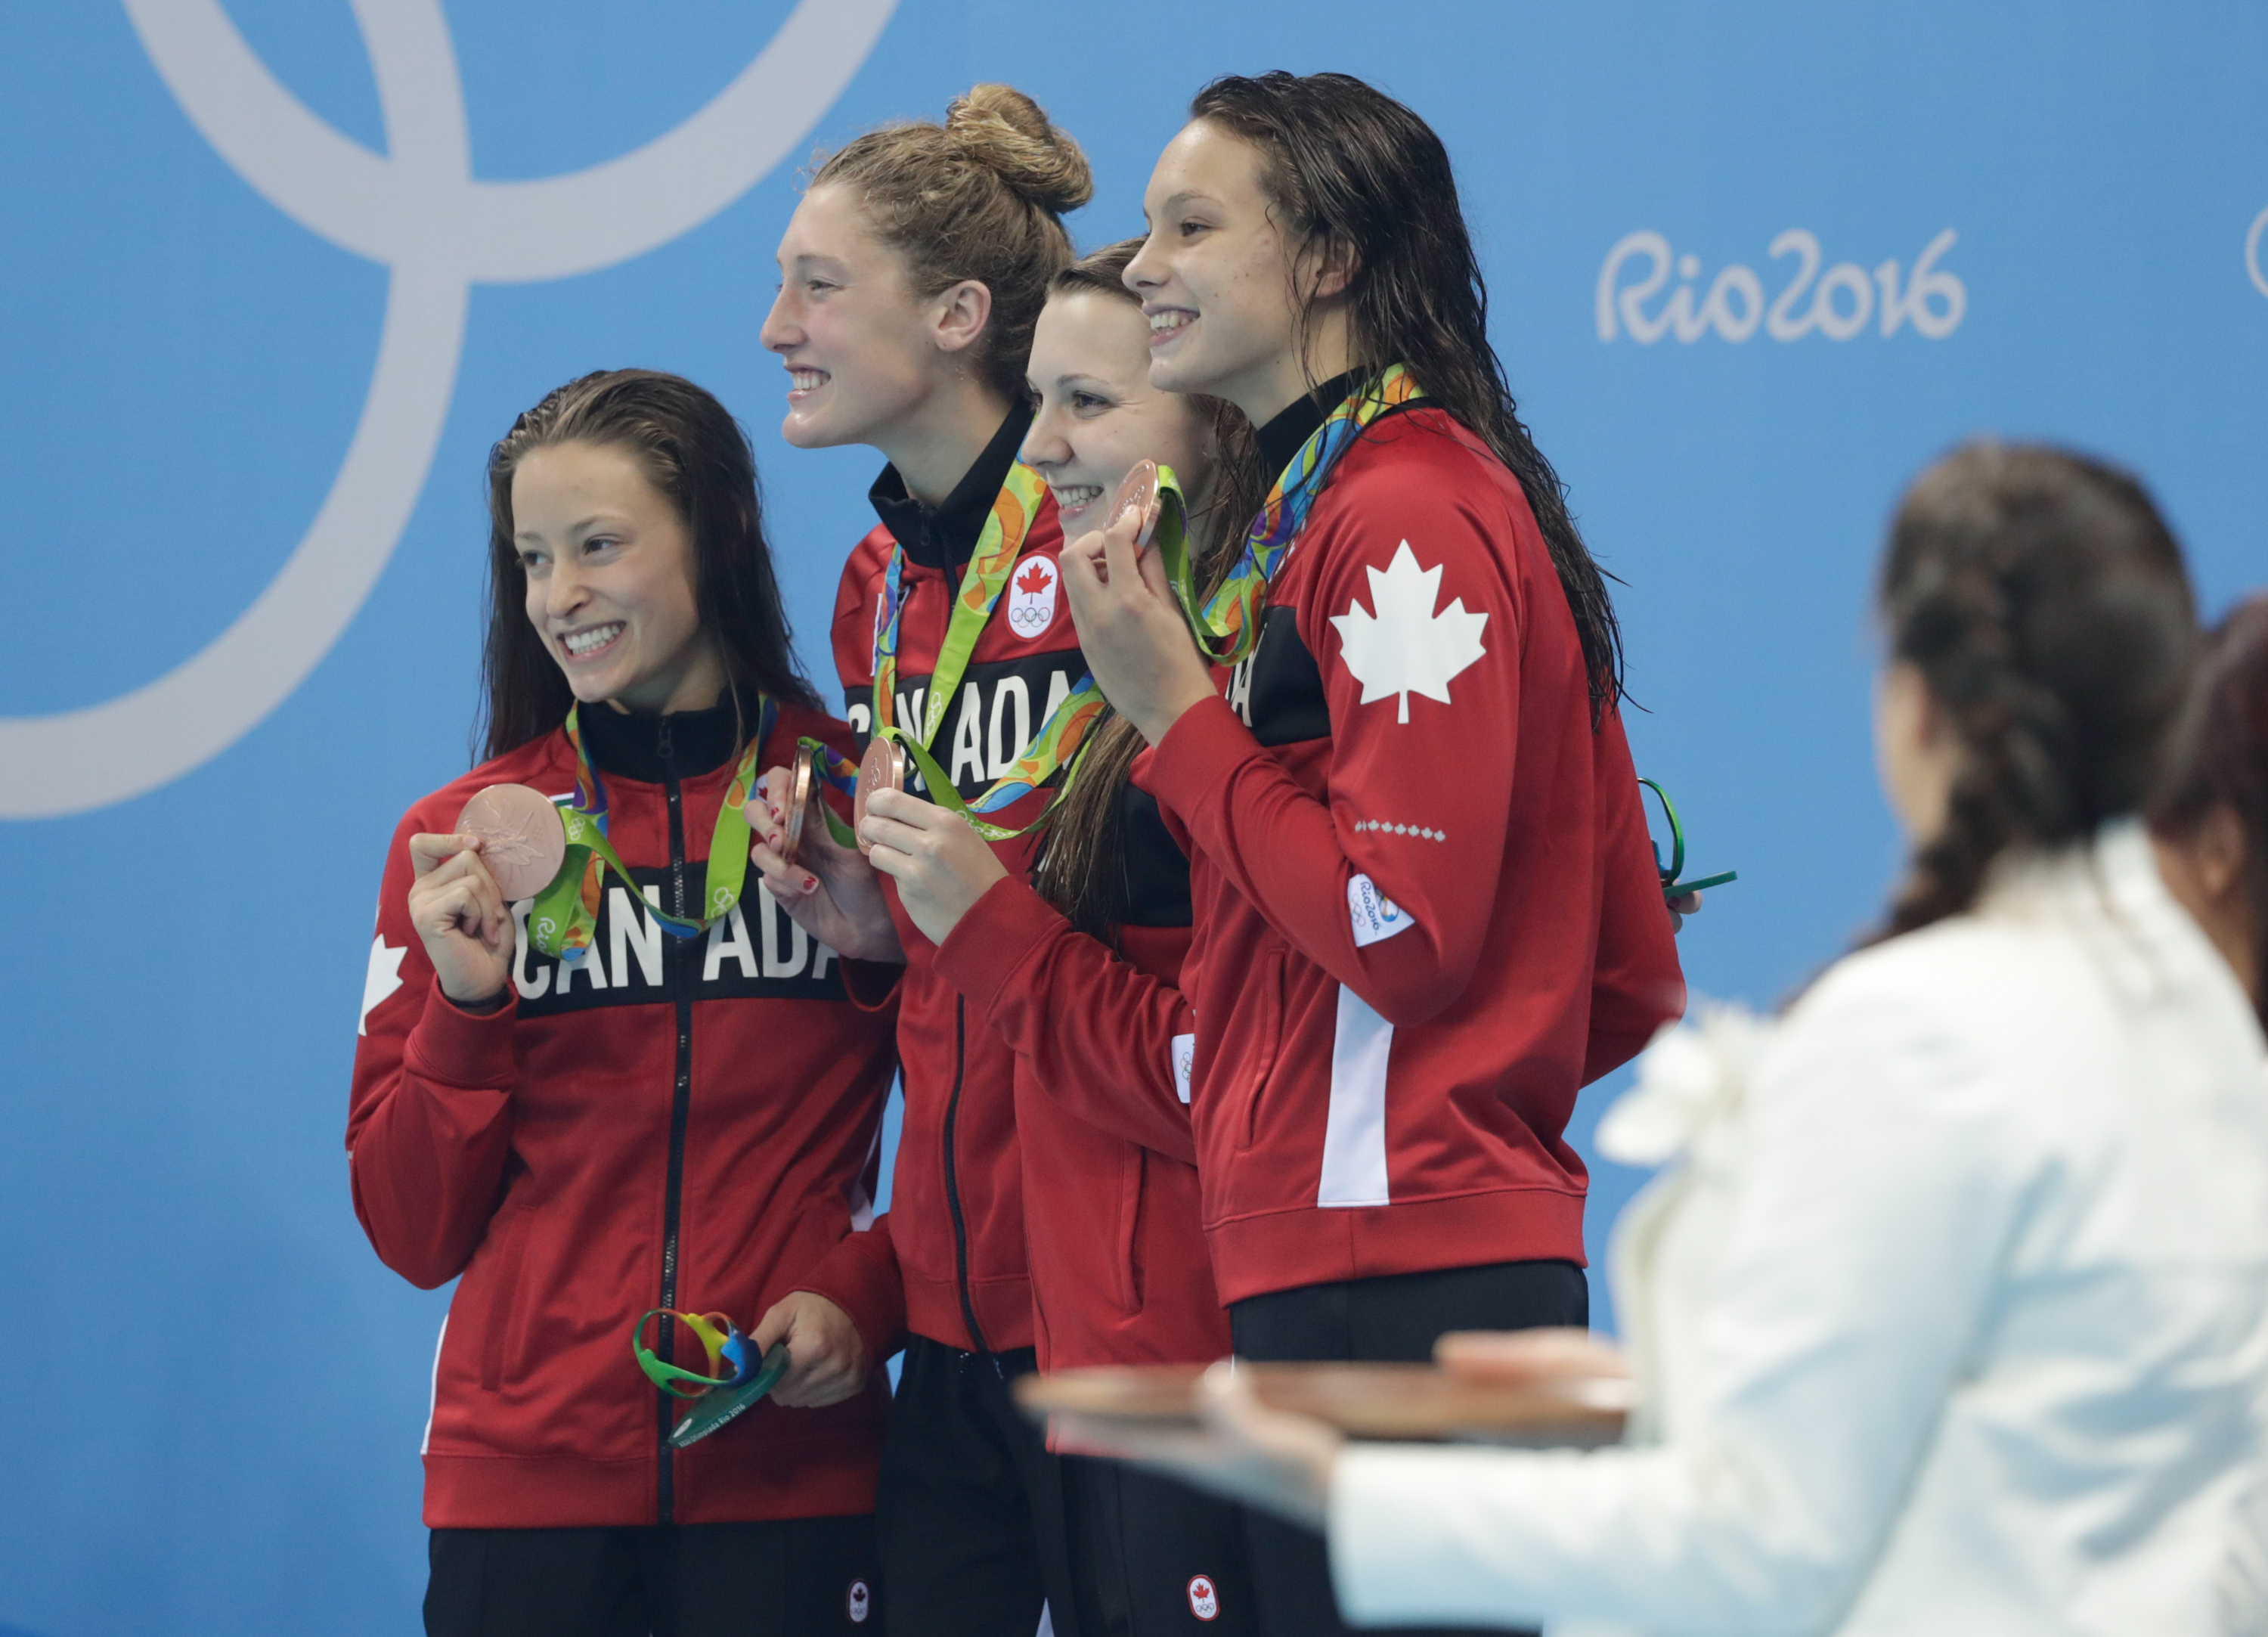 Following whirlwind Rio performance, Penny Oleksiak ready to